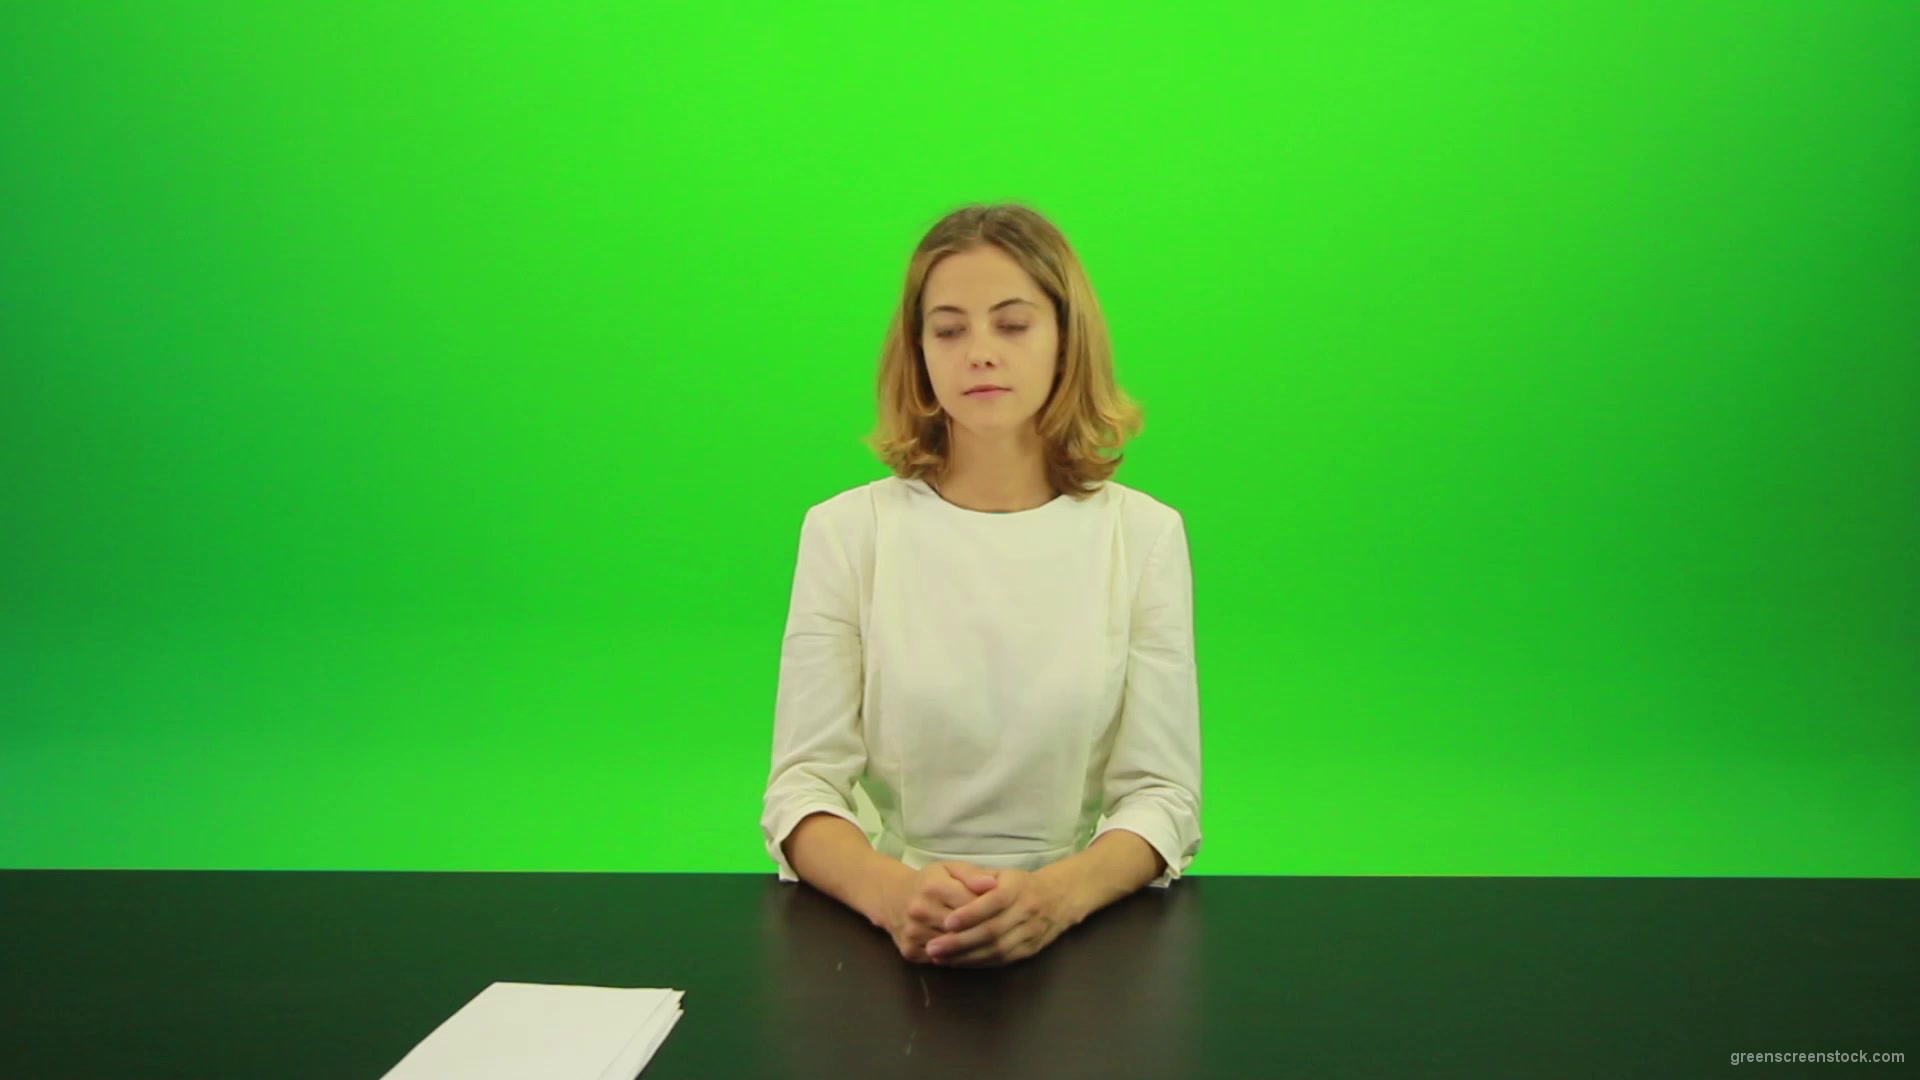 Blonde-hair-girl-in-white-shirt-give-3-point-mark-score-Full-HD-Green-Screen-Video-Footage_001 Green Screen Stock